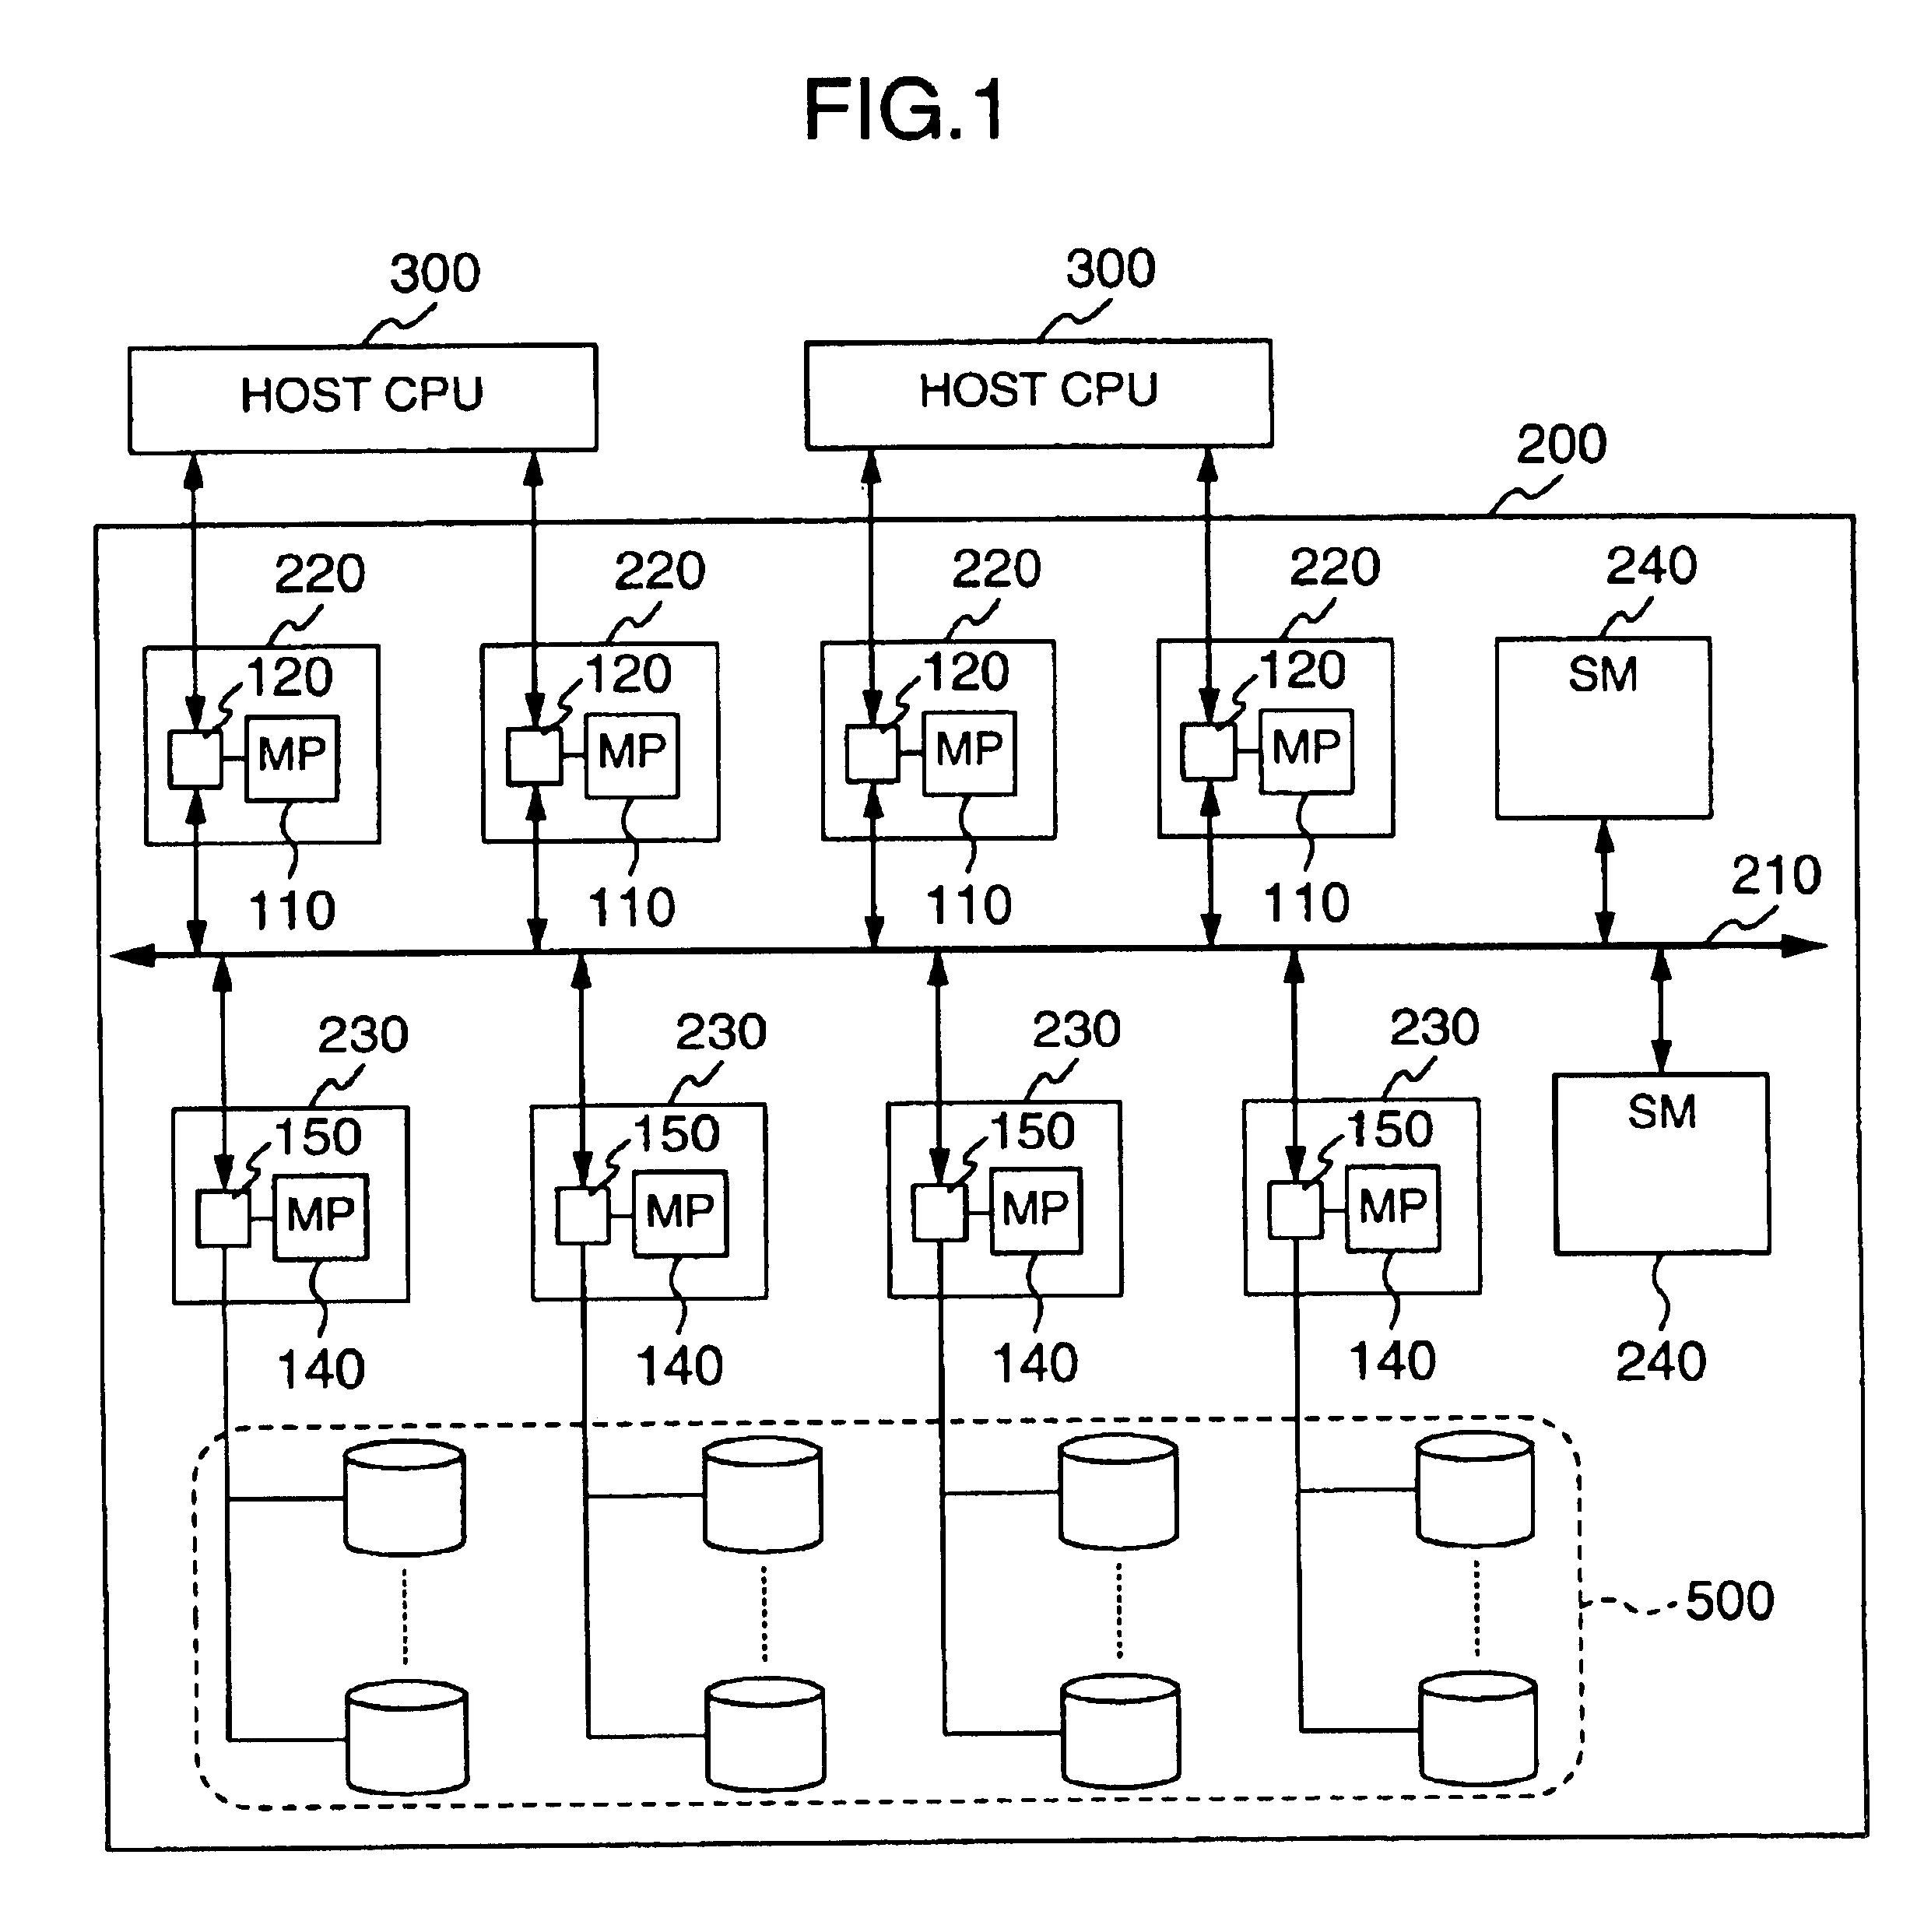 Disk array system and a method for controlling the disk array system